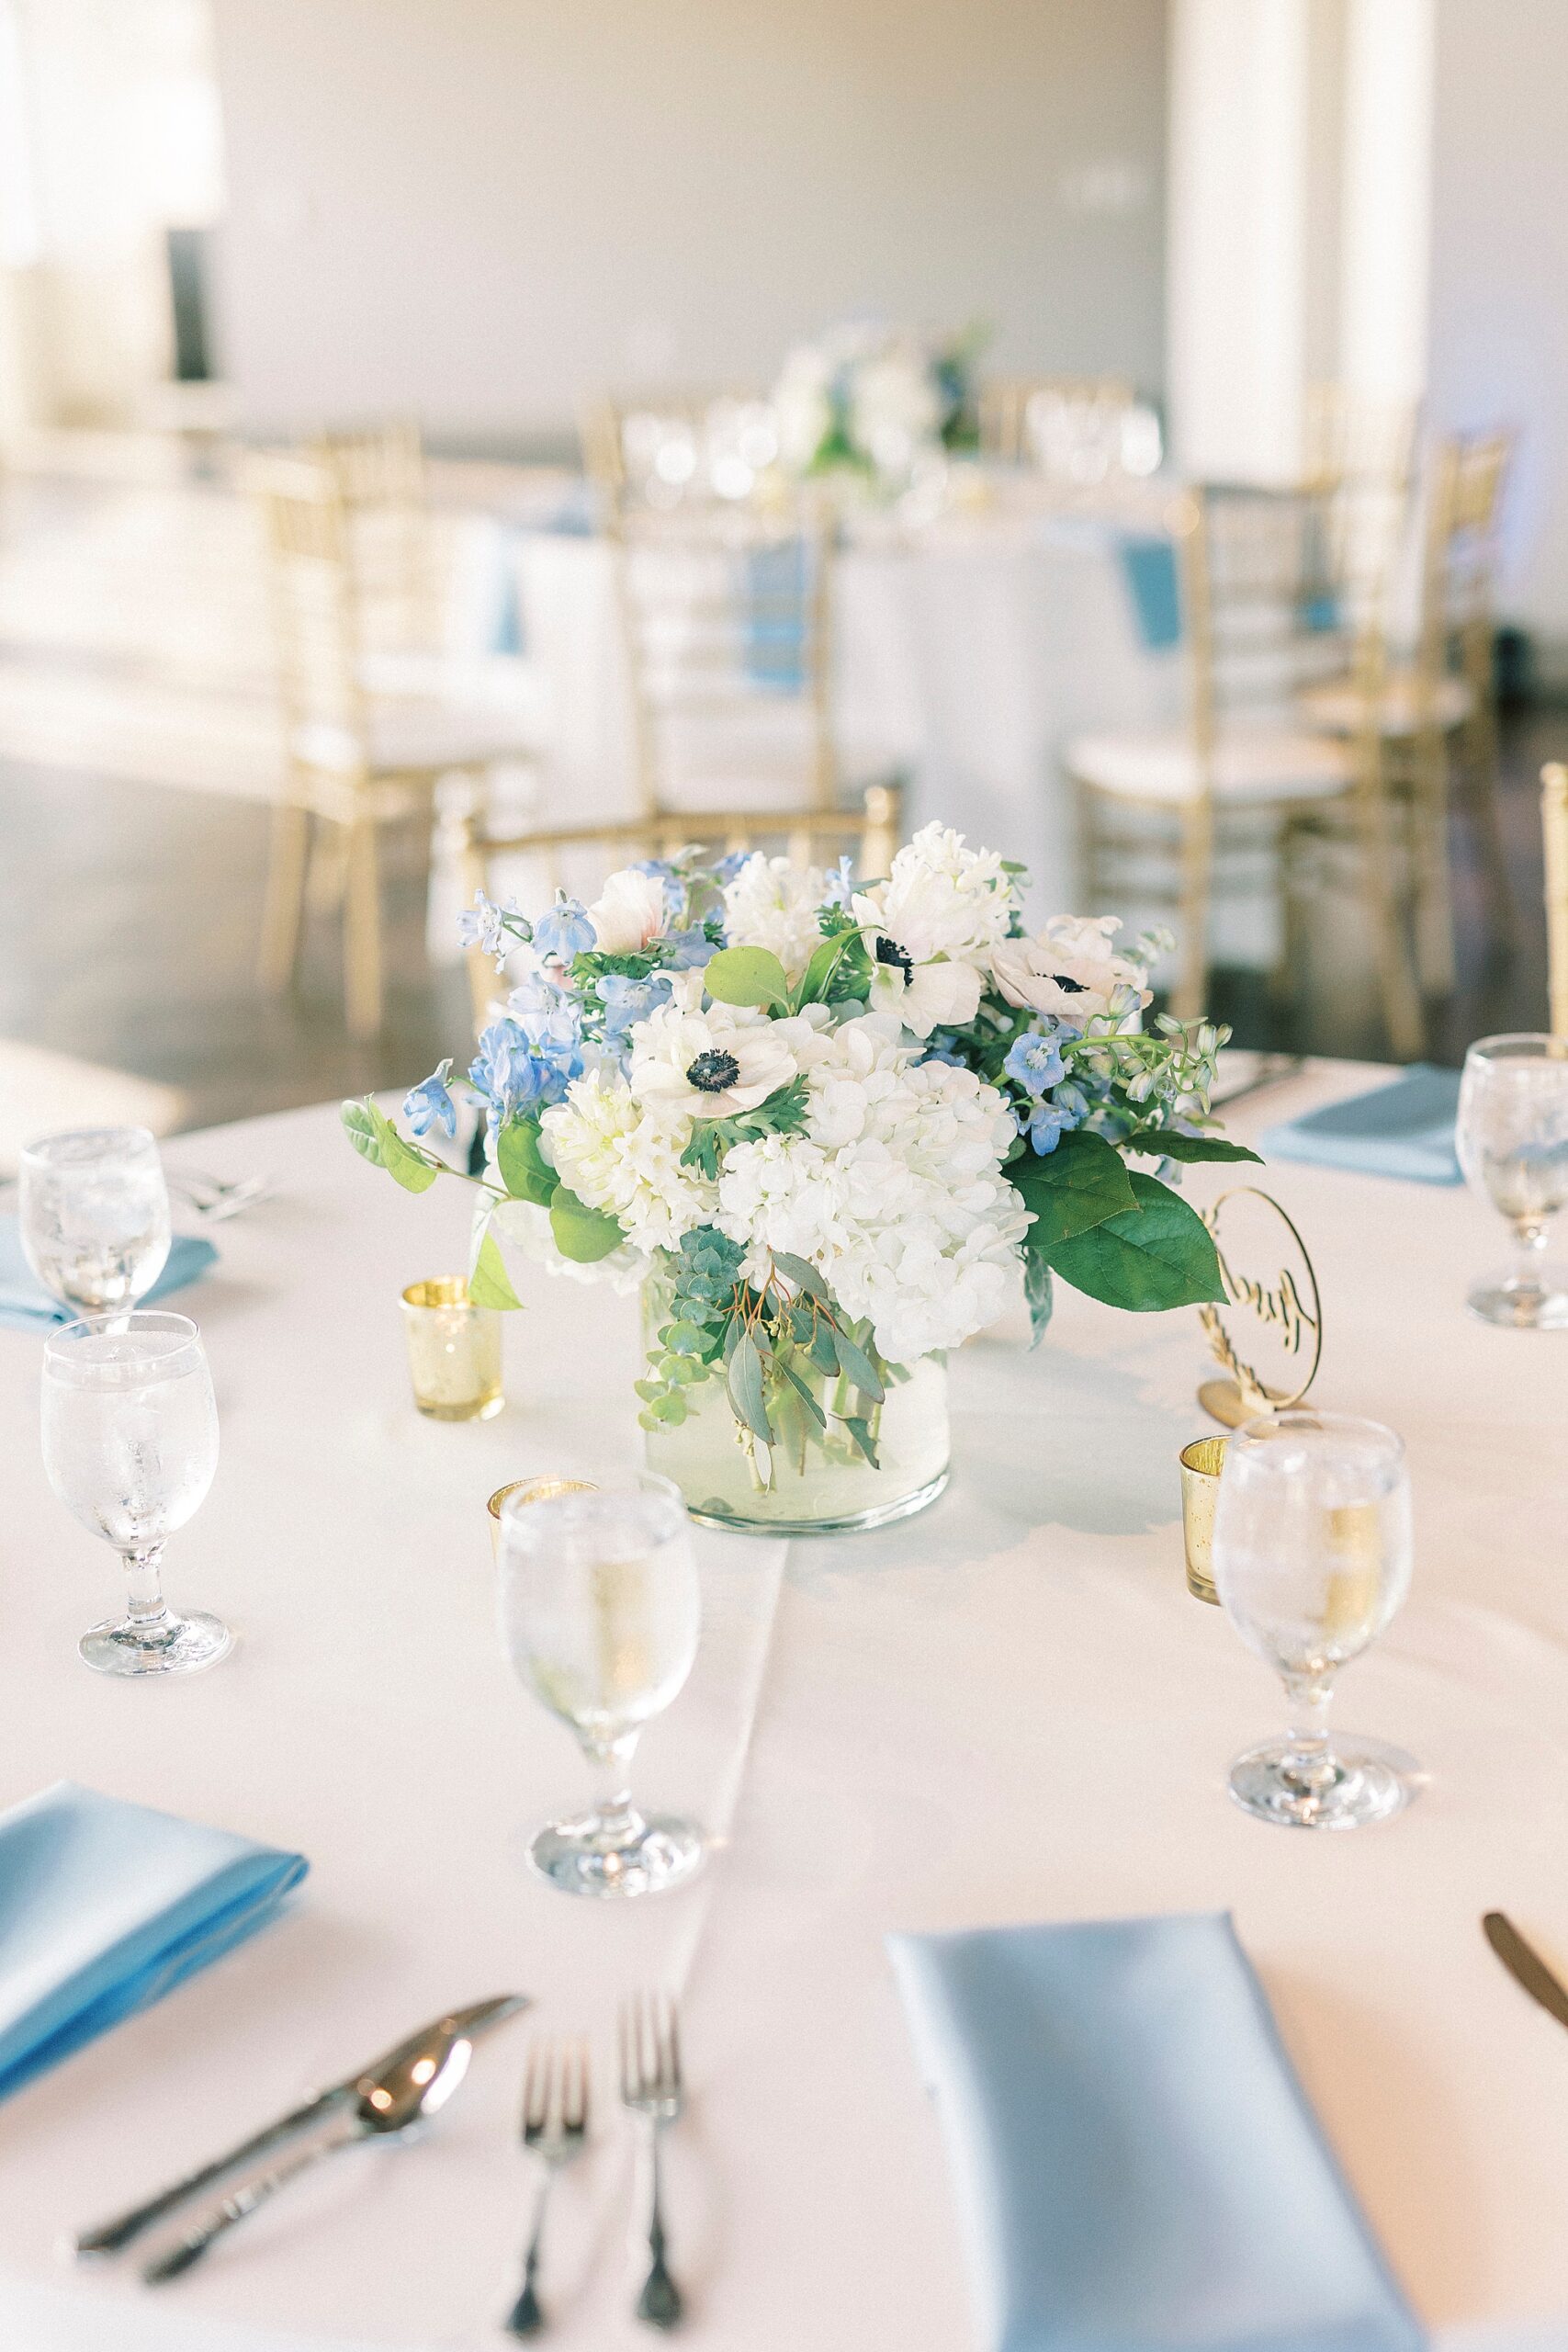 wedding centerpieces with blue and white flowers